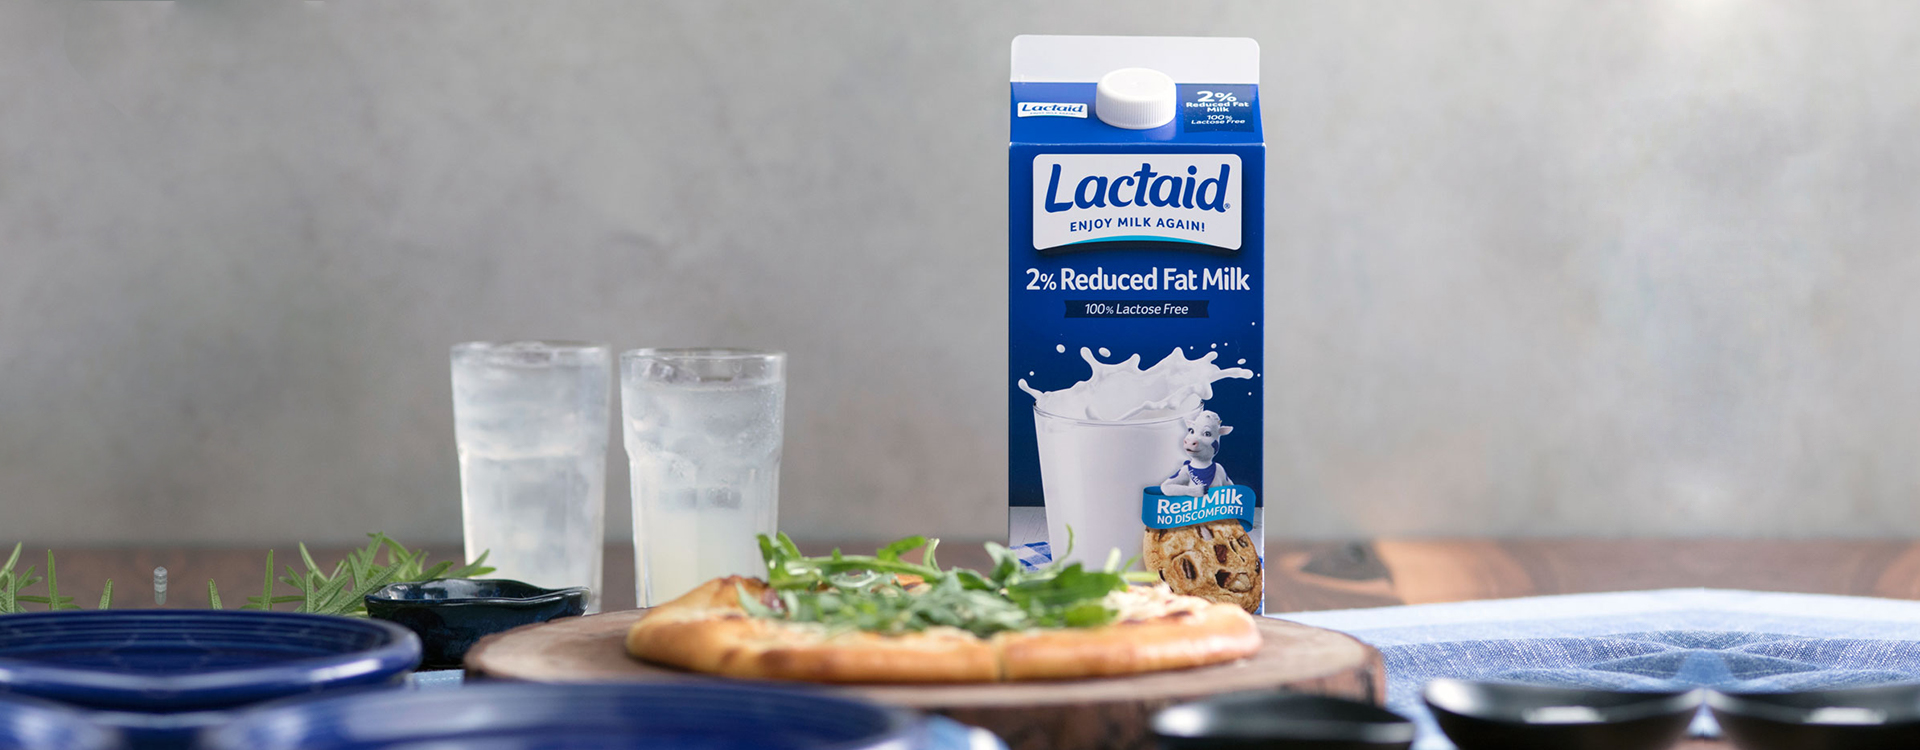 Lactaid_Cover_pizza